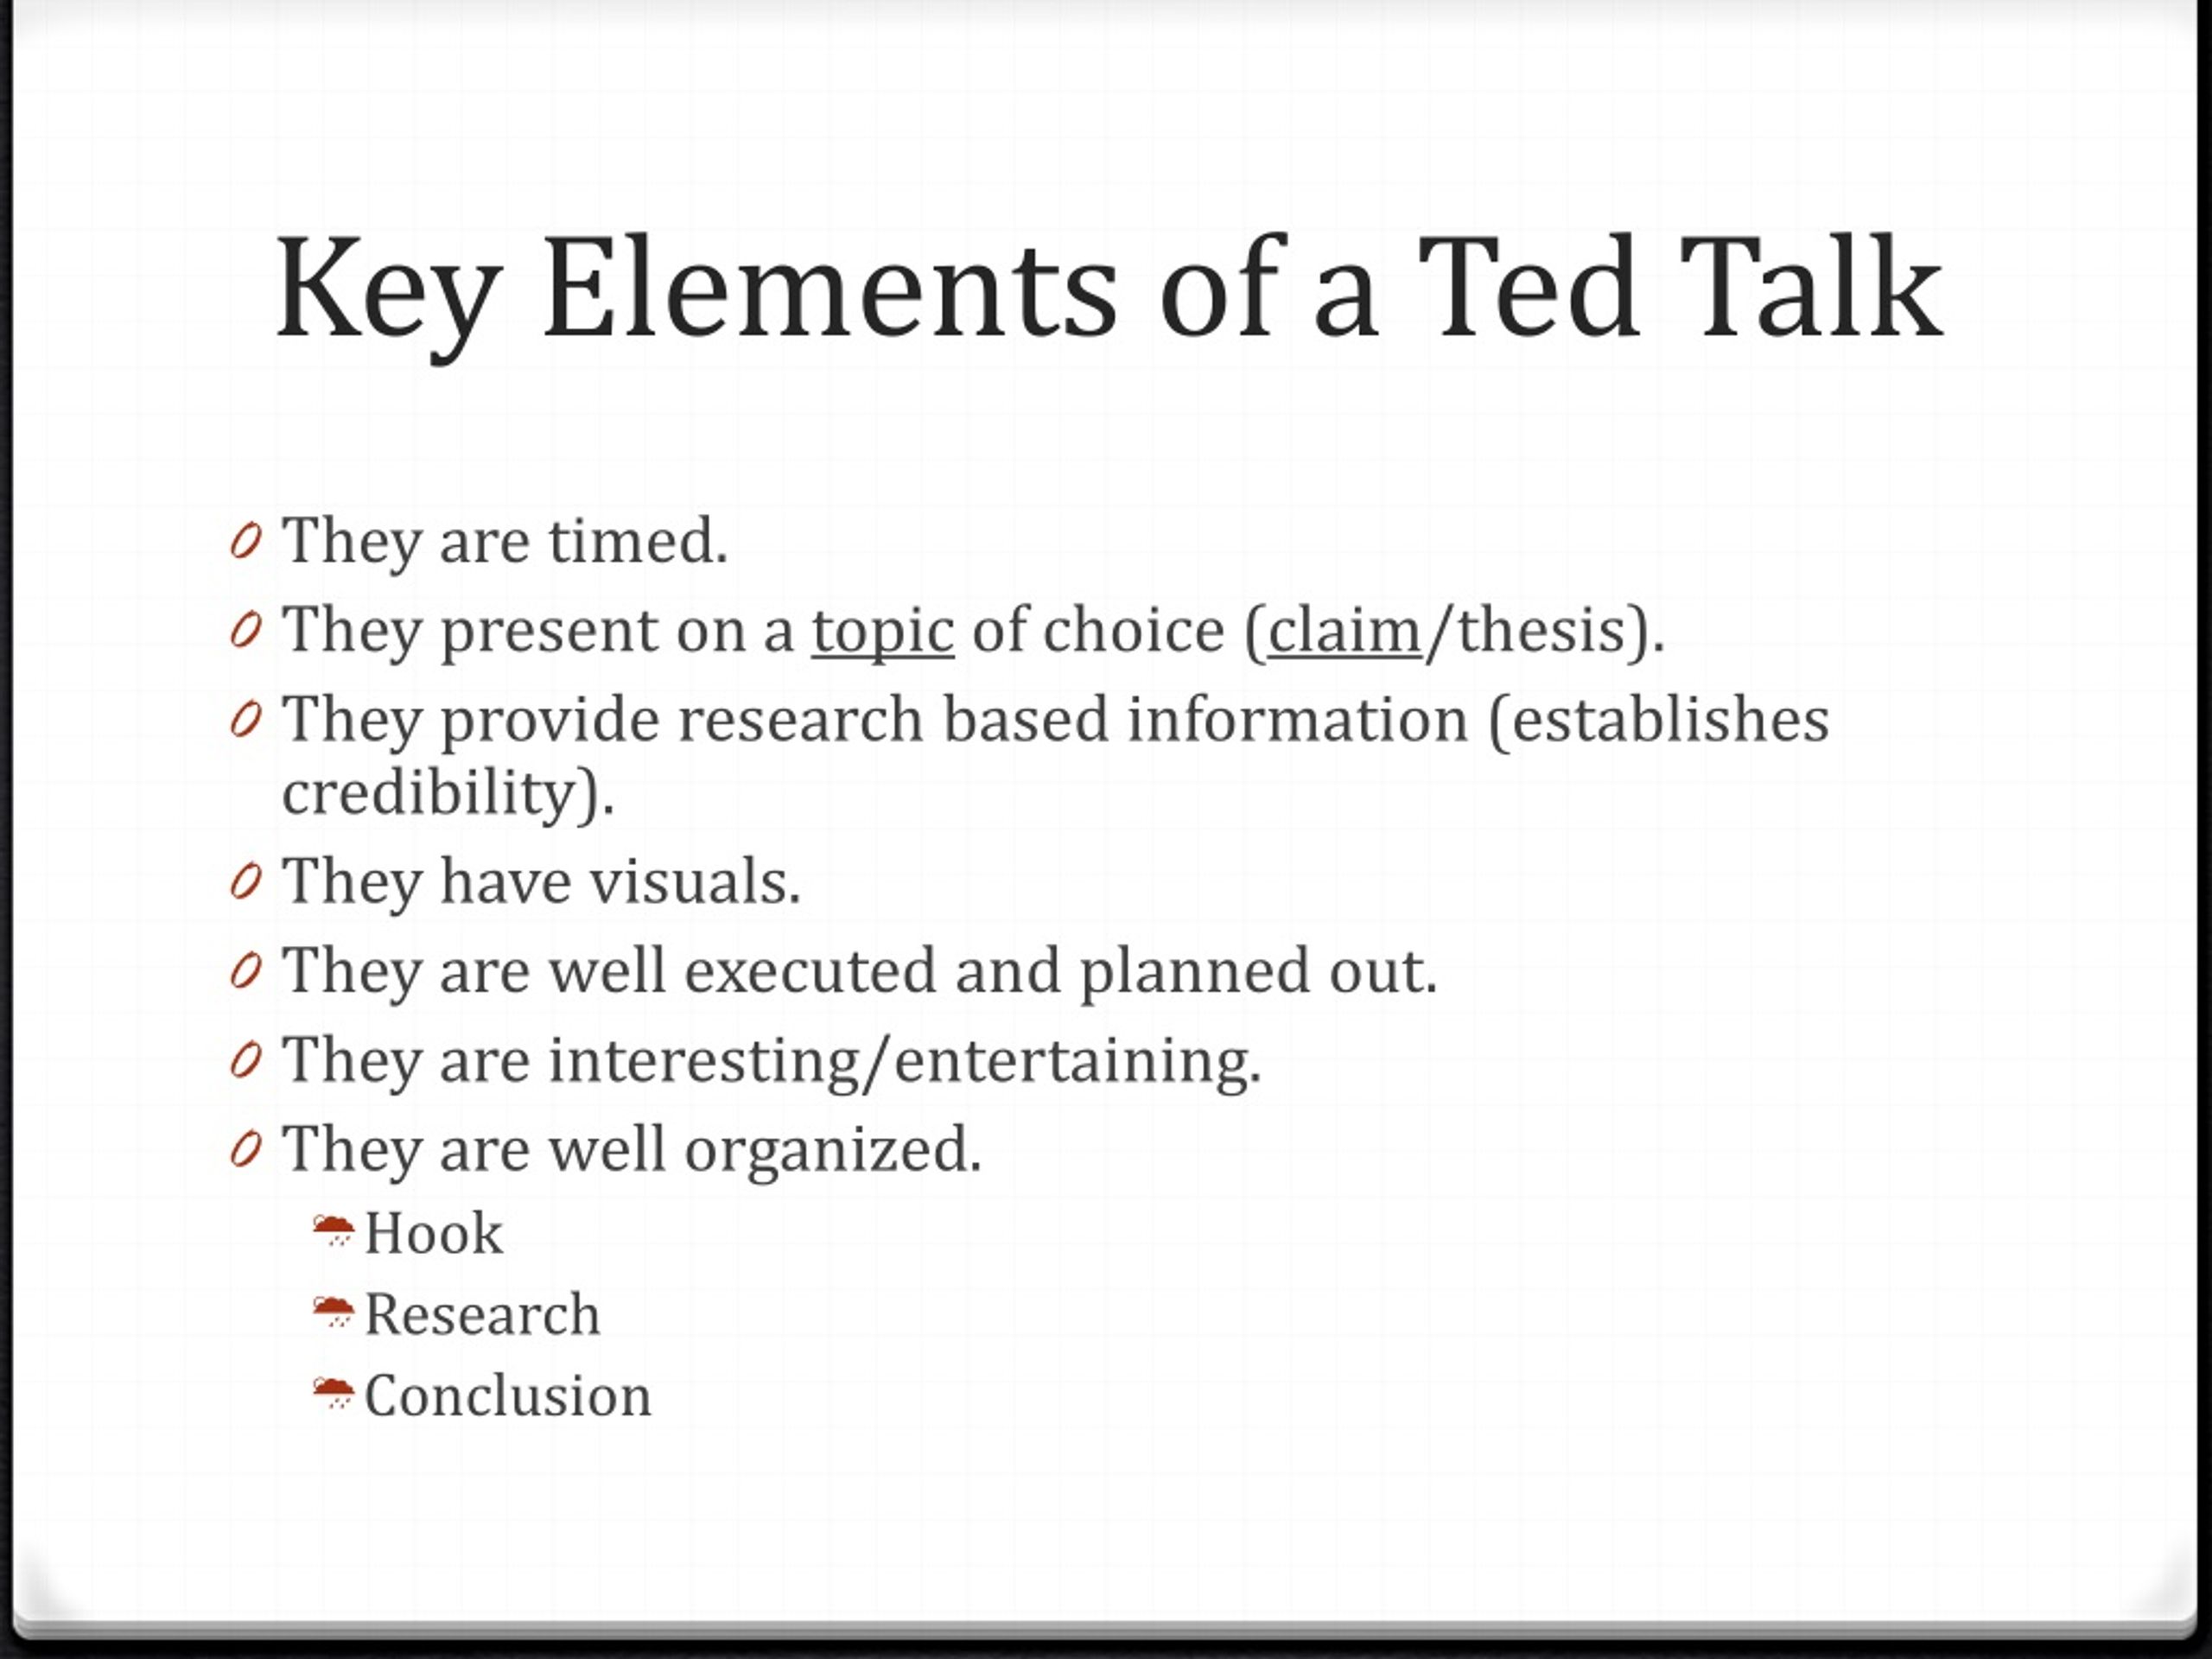 what is the thesis (main argument) of the ted talk